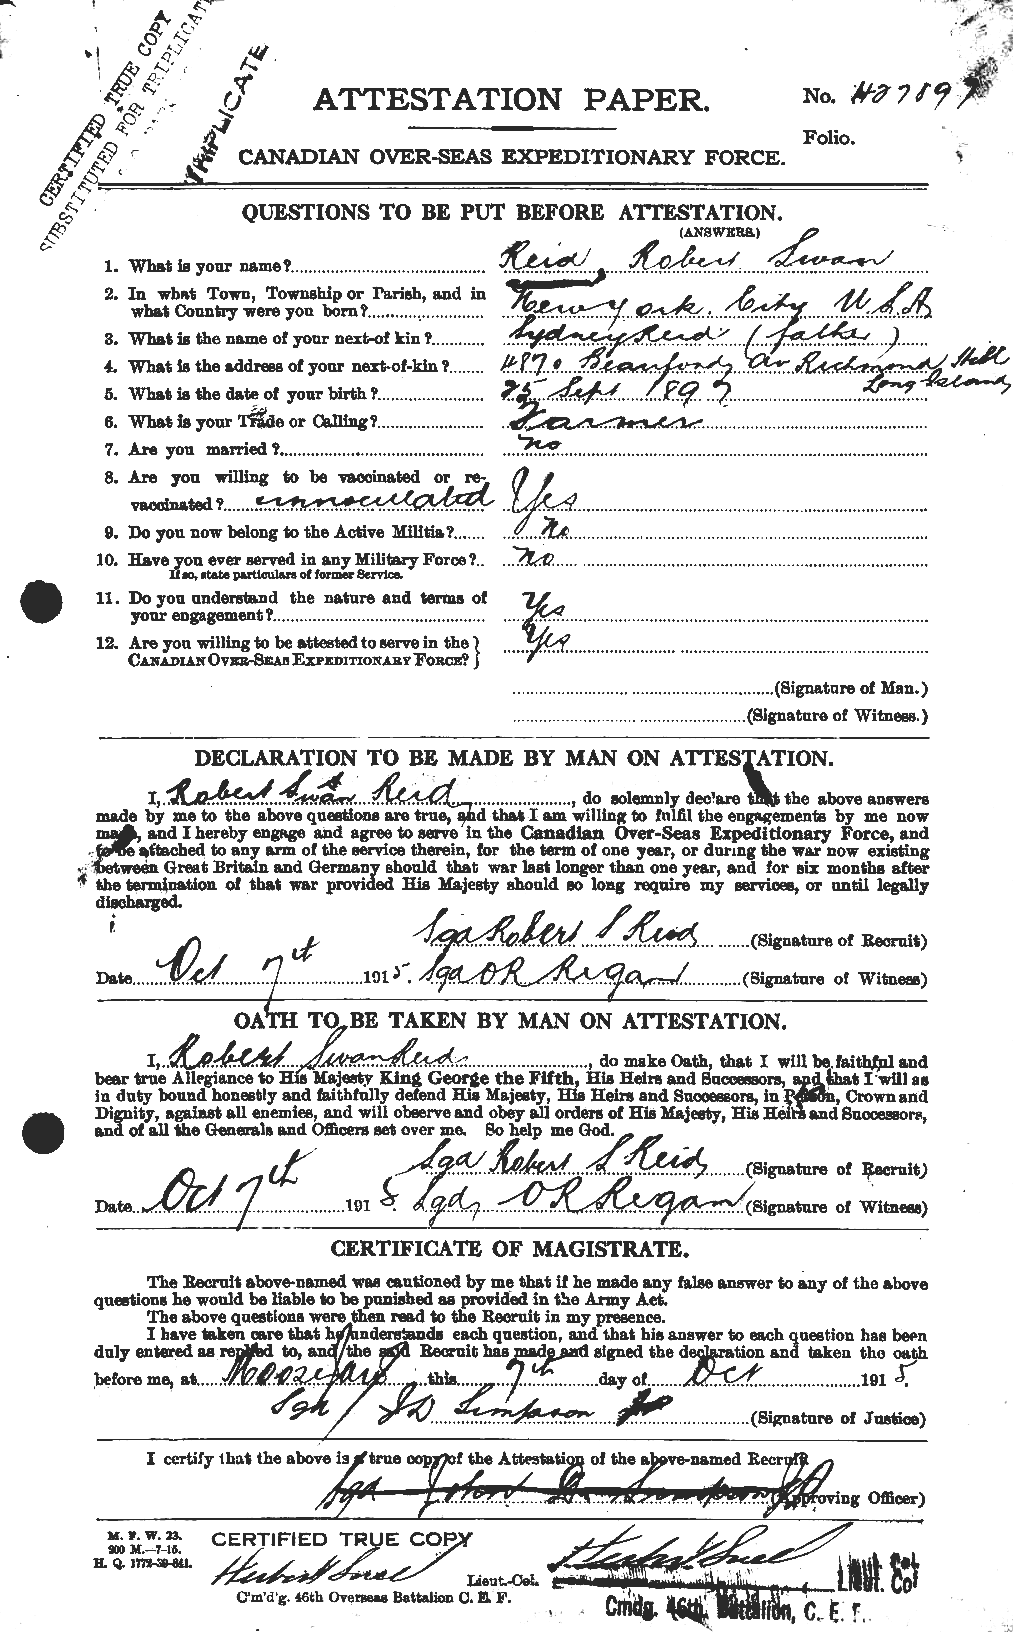 Personnel Records of the First World War - CEF 601923a